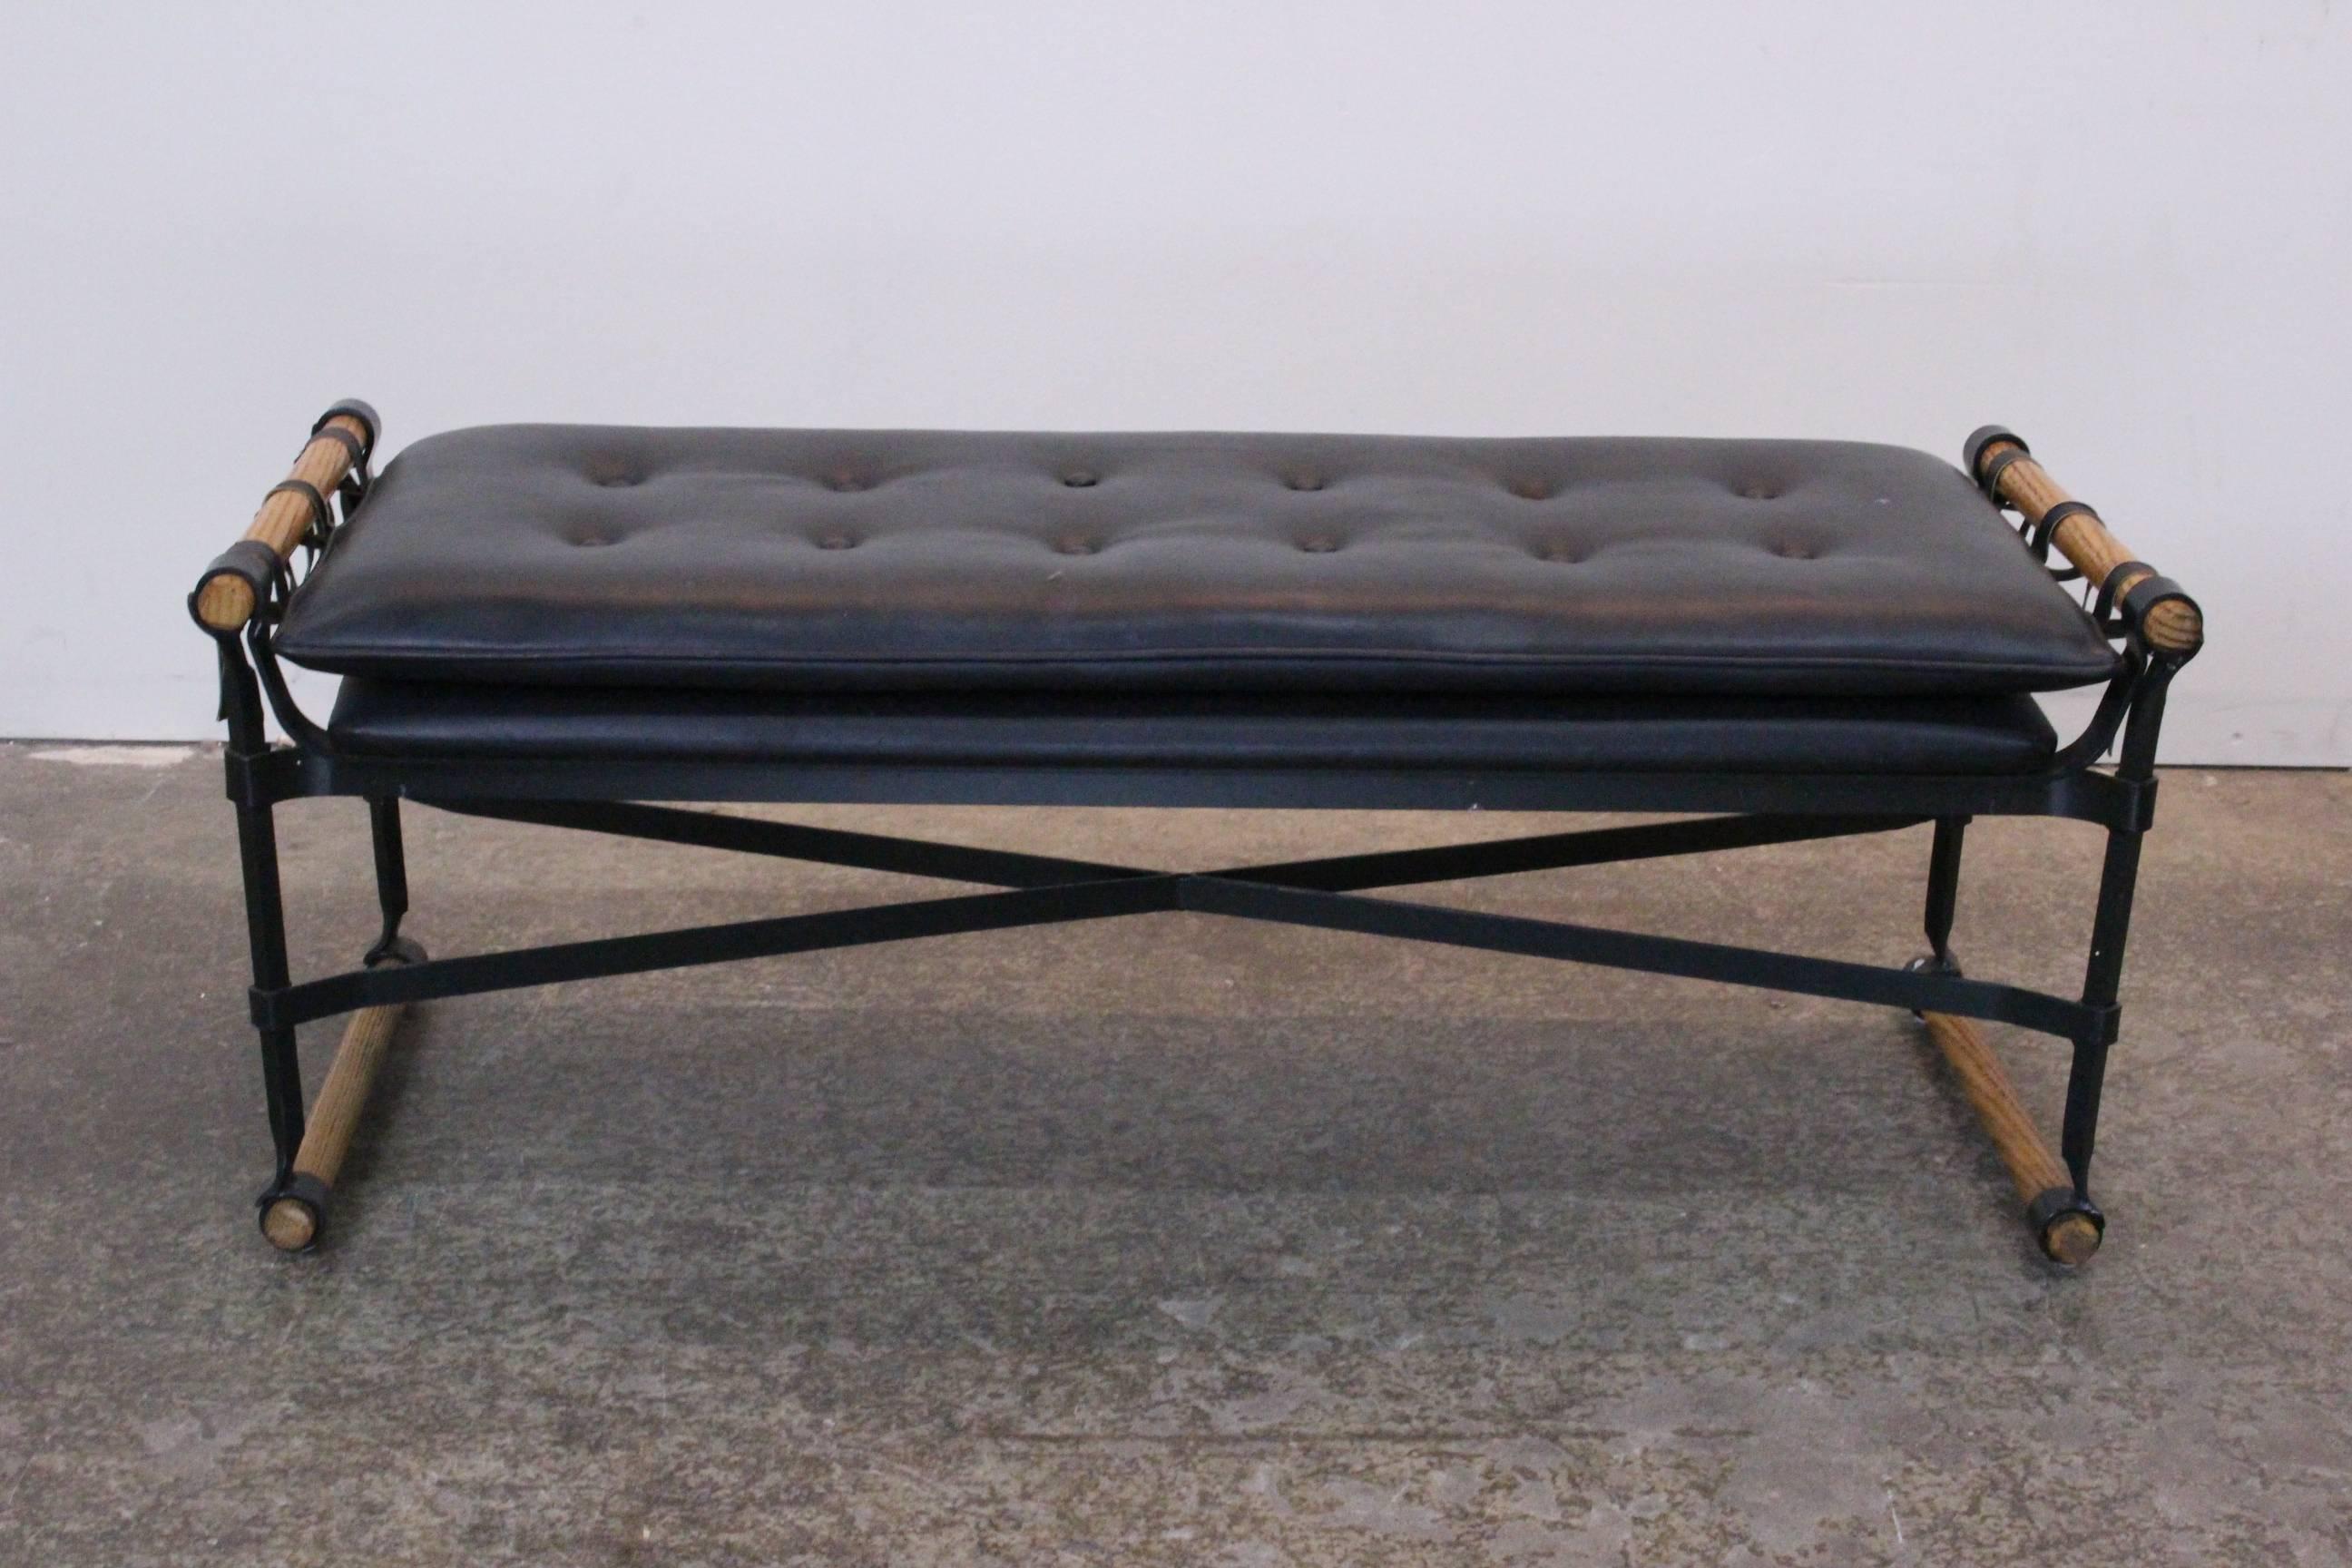 Pair of faux leather Campaign benches by Cleo Baldon. Wrought iron frames with oak stretchers.

Dimensions: 47